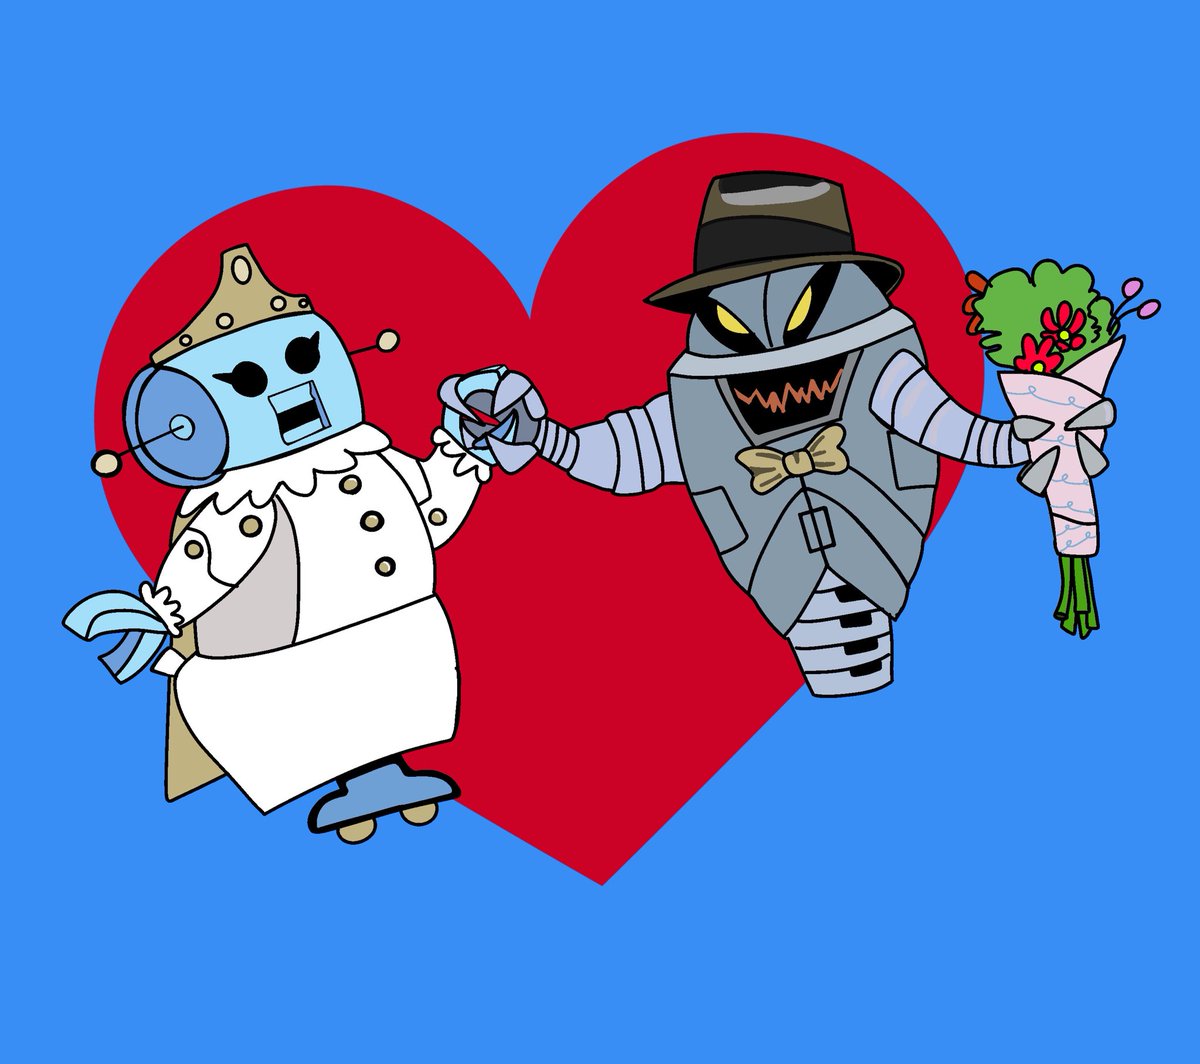 For #mastersofspring2023 

Prompt: 💥The Jetsons ⚔️ 🛸 

💥Rosey and Hover get hitched! 💒 

Mrs and Mr Robot! 

By @Brooksidefilms 

@motudrawing #motudrawingchallenge #thejetsons #heman #mastersoftheuniverse #hoverrobots #robots #cartoons #scifi #80s #80scartoons